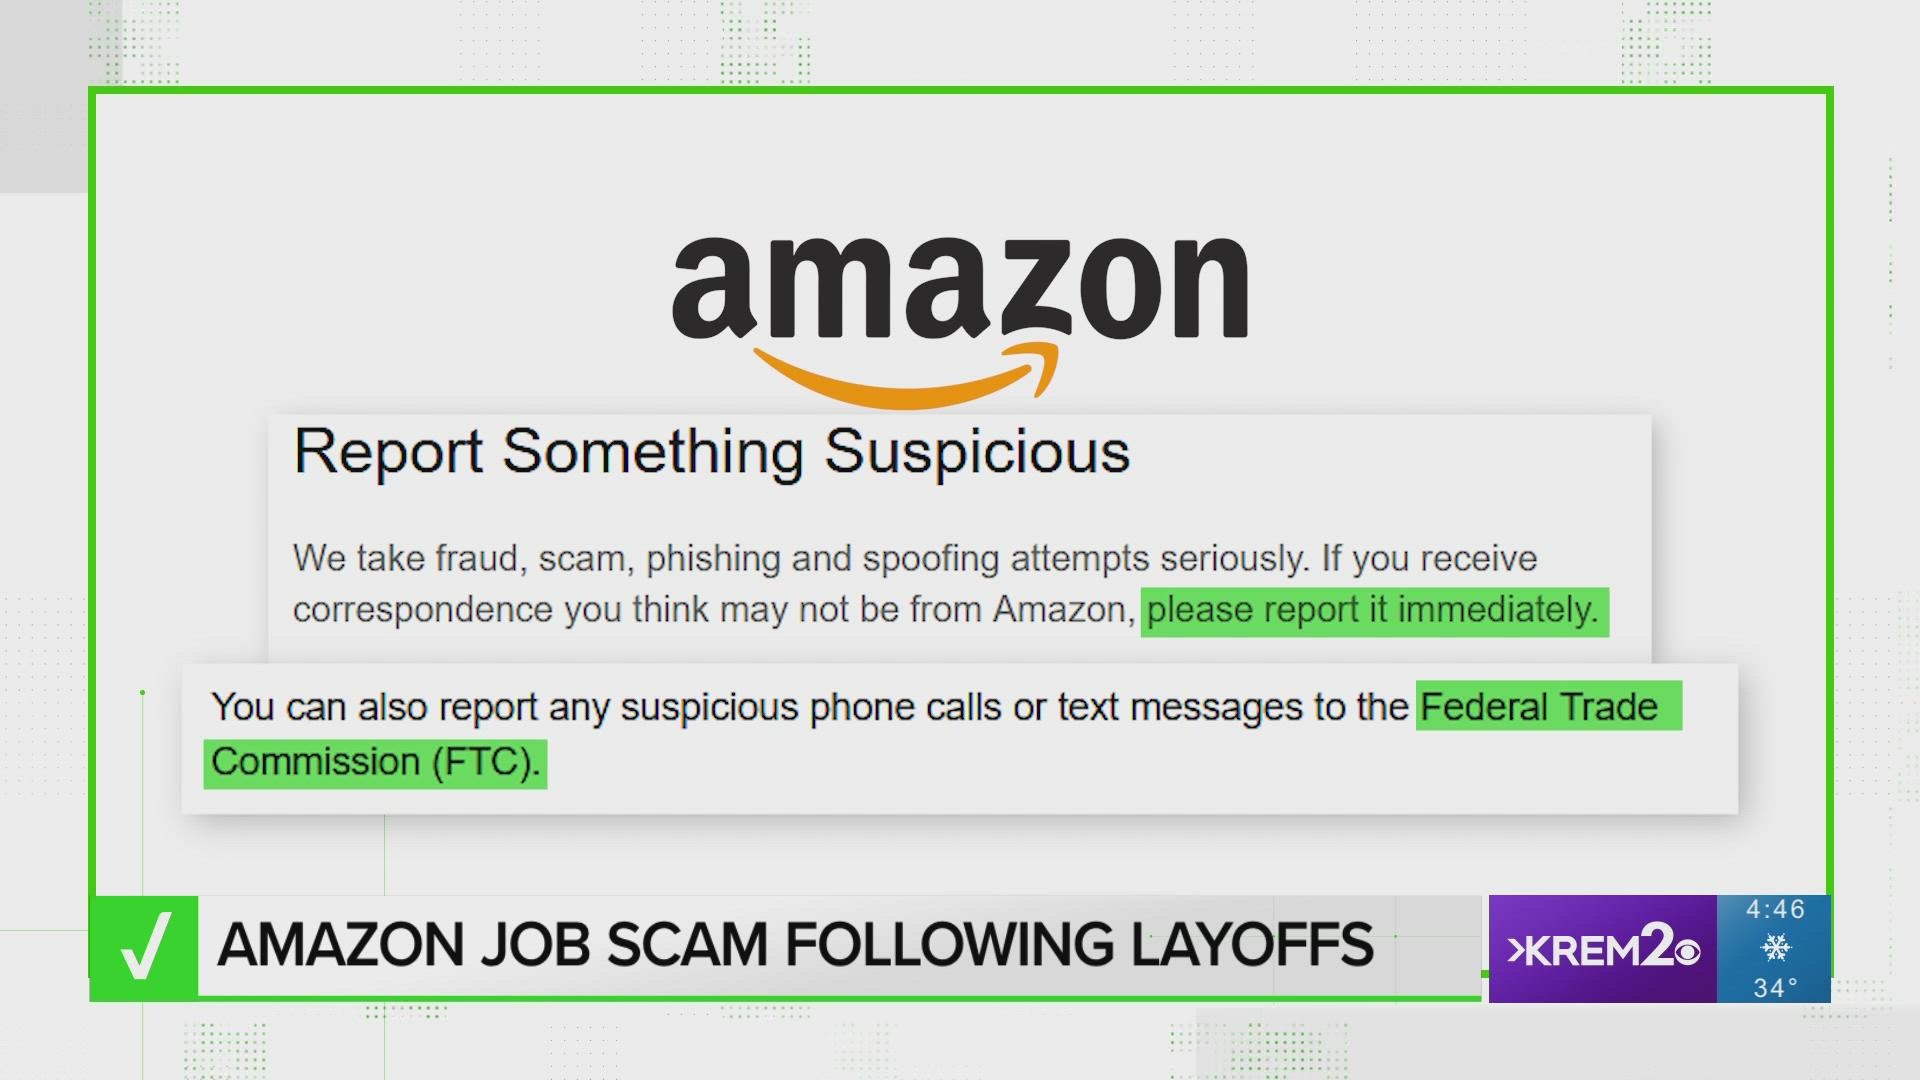 Following layoffs from Amazon, people have been getting job offers claiming they can make $10-$200 an hour, but is that true? Our Verify team checks it out.